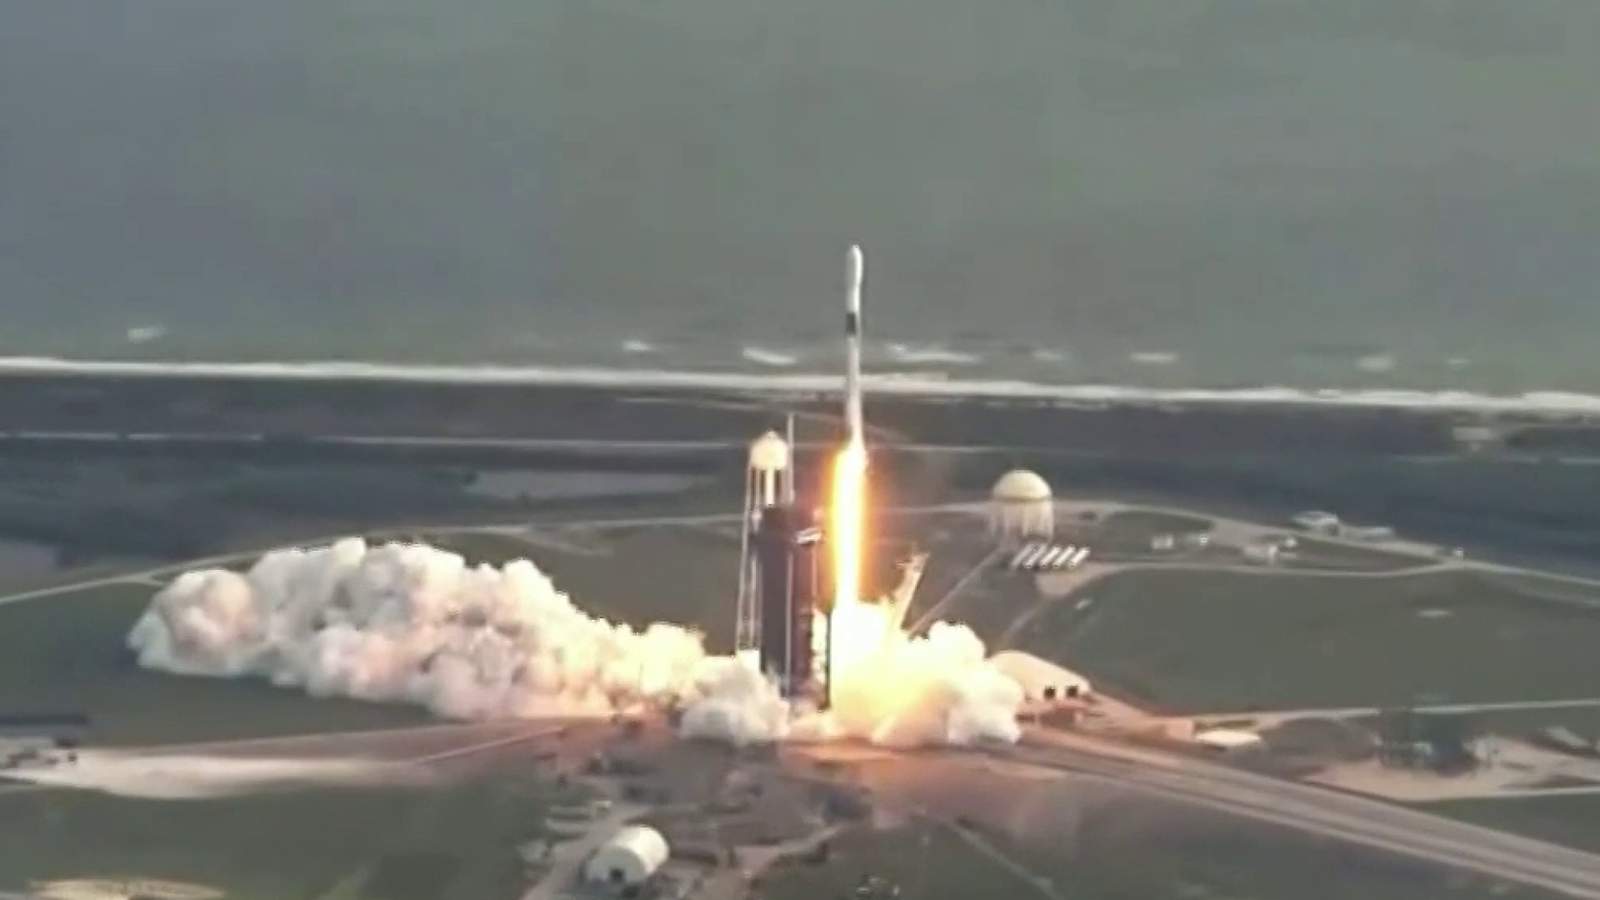 SpaceX Falcon 9 launched with a Turkish satellite from Cape Canaveral